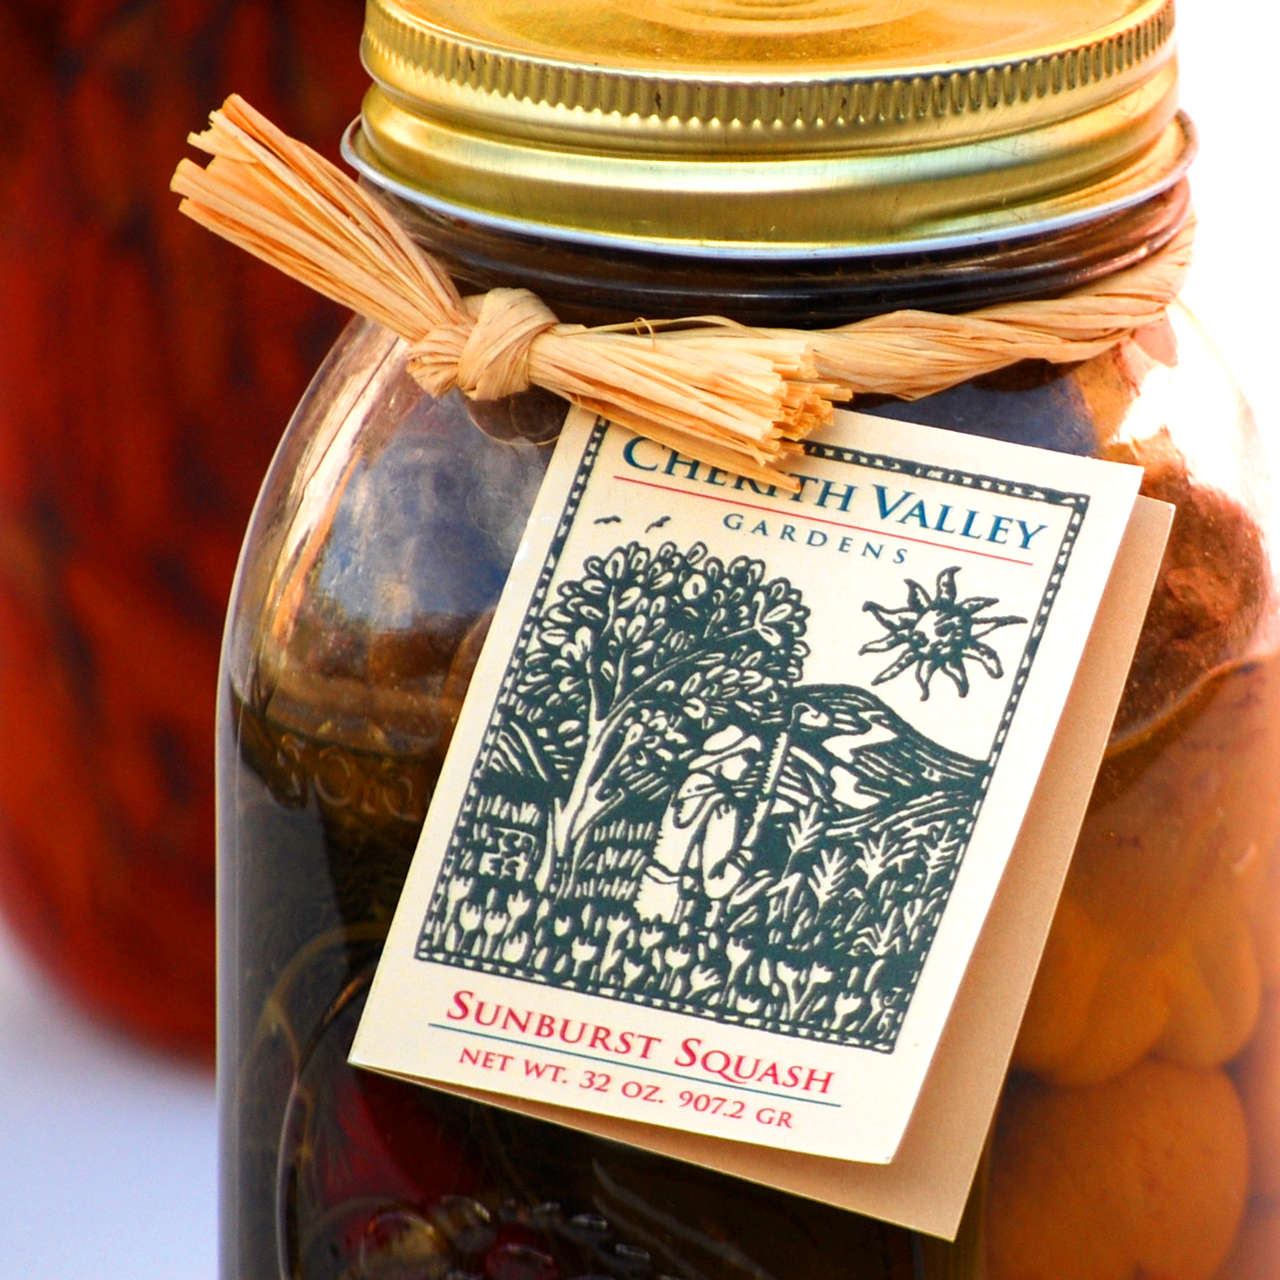 An image of a jar of Cherith Valley Gardens Sunburst Squash package design